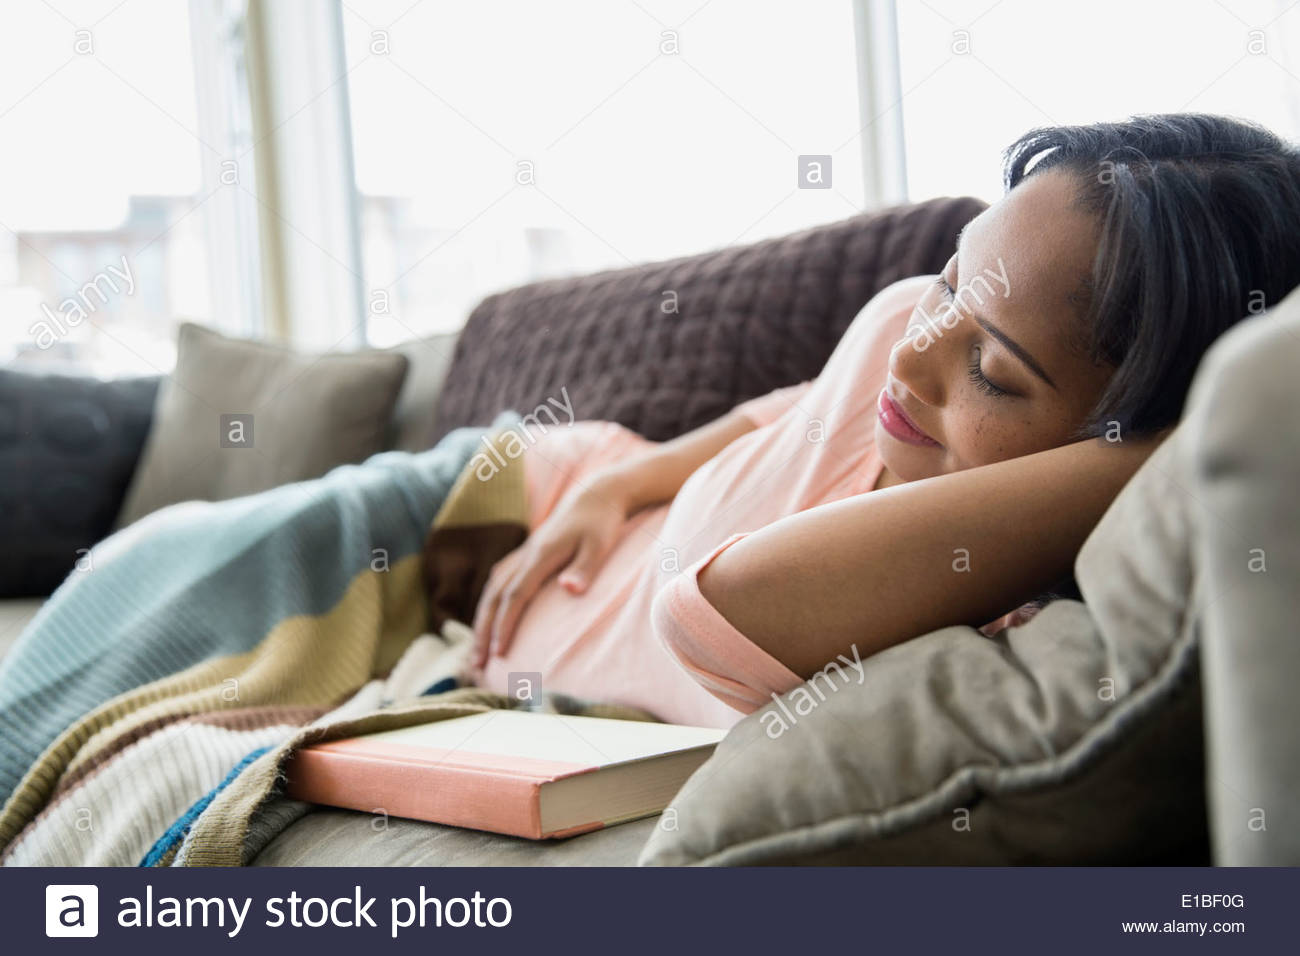 Pregnant woman sleeping on sofa Banque D'Images